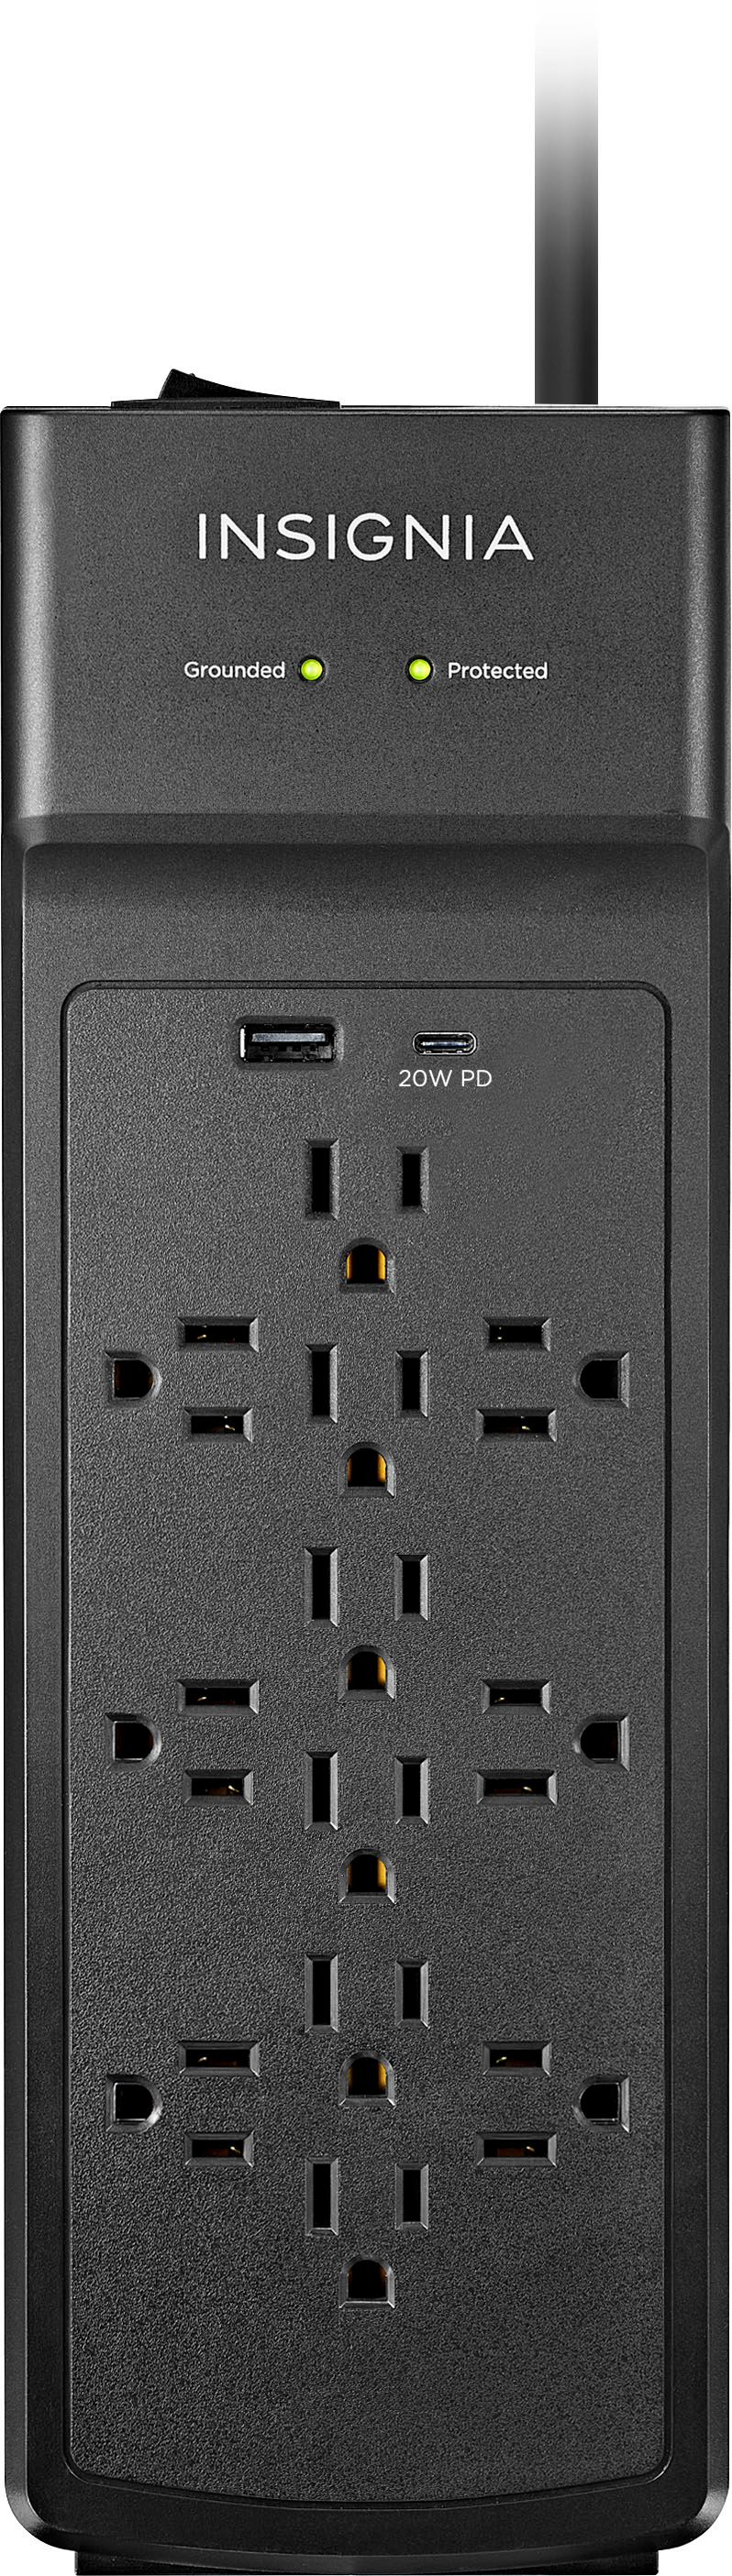 Insignia™ 12-Outlet/1-USB-C/1-USB 3,600 Joules Surge Protector Strip Black  NS-HW505 - Best Buy